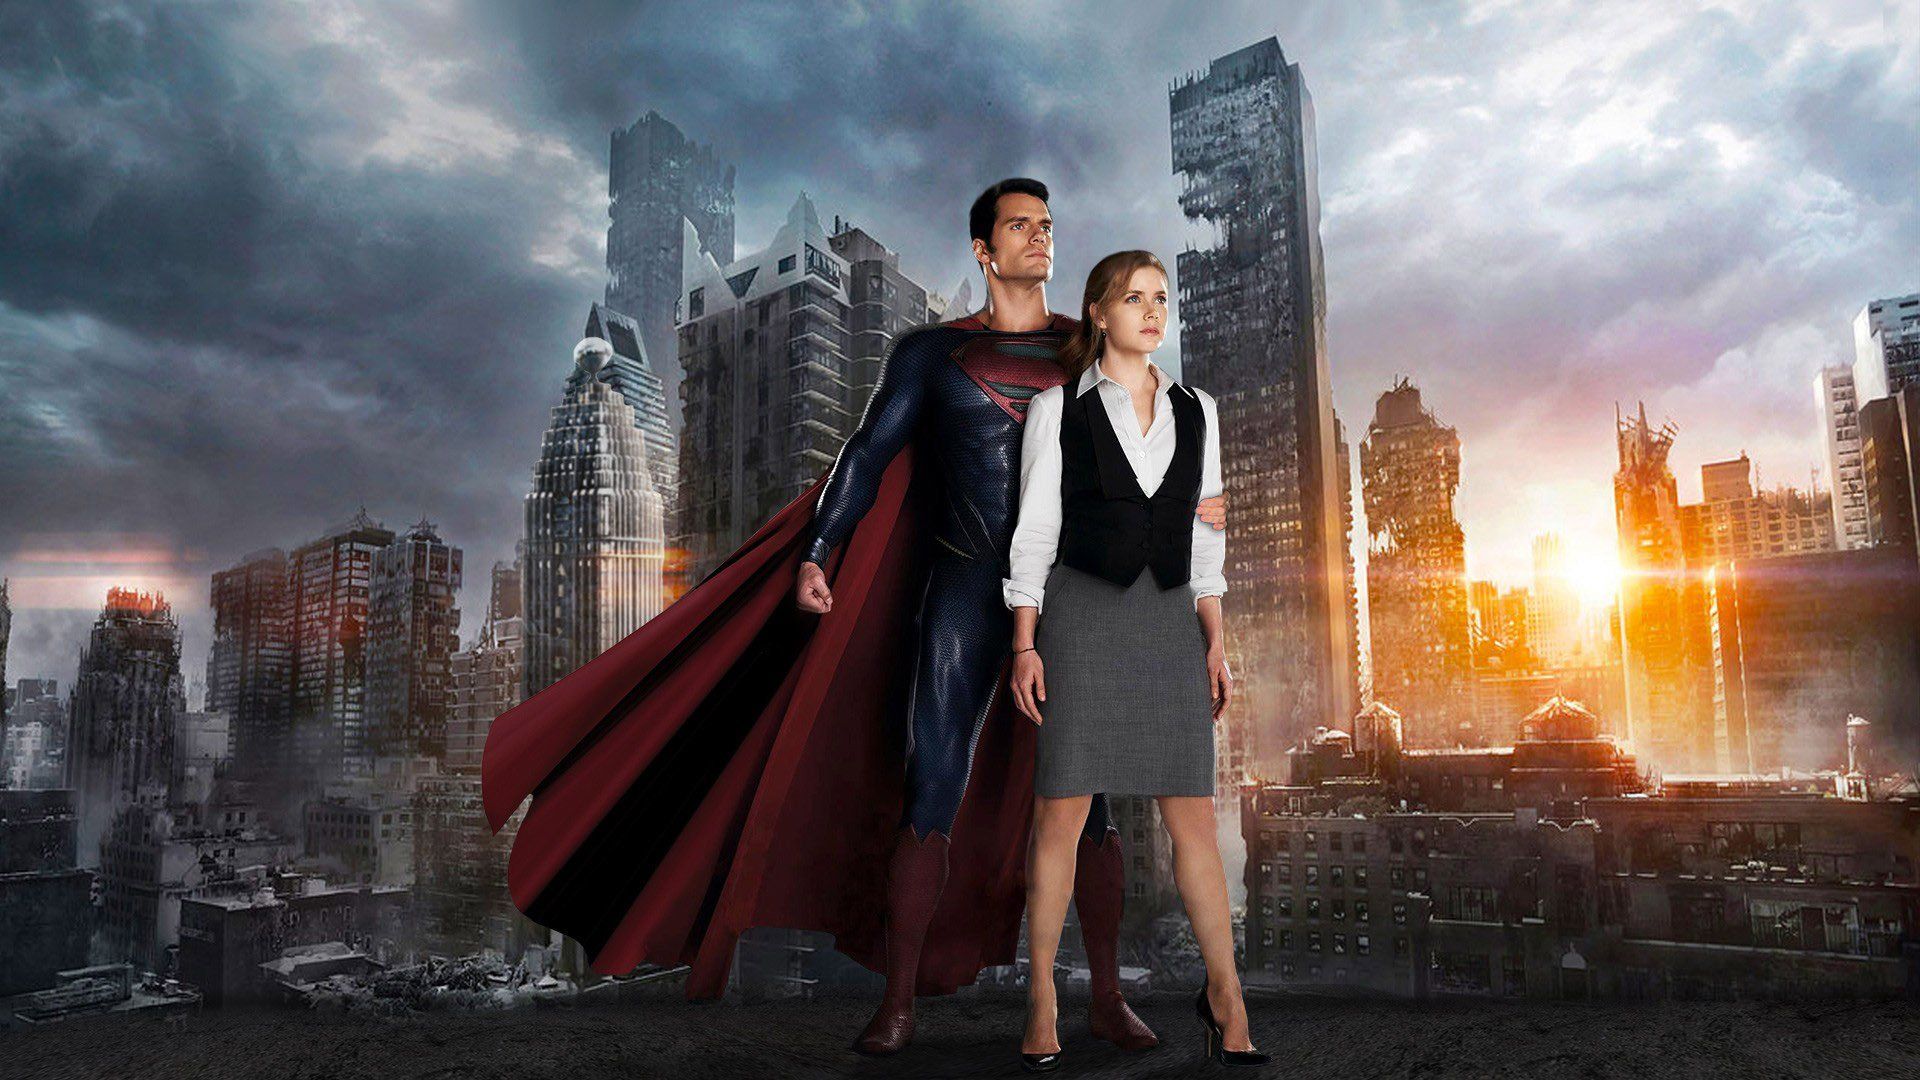 November 2016: Amy Adams Says Playing Lois Lane is Tricky